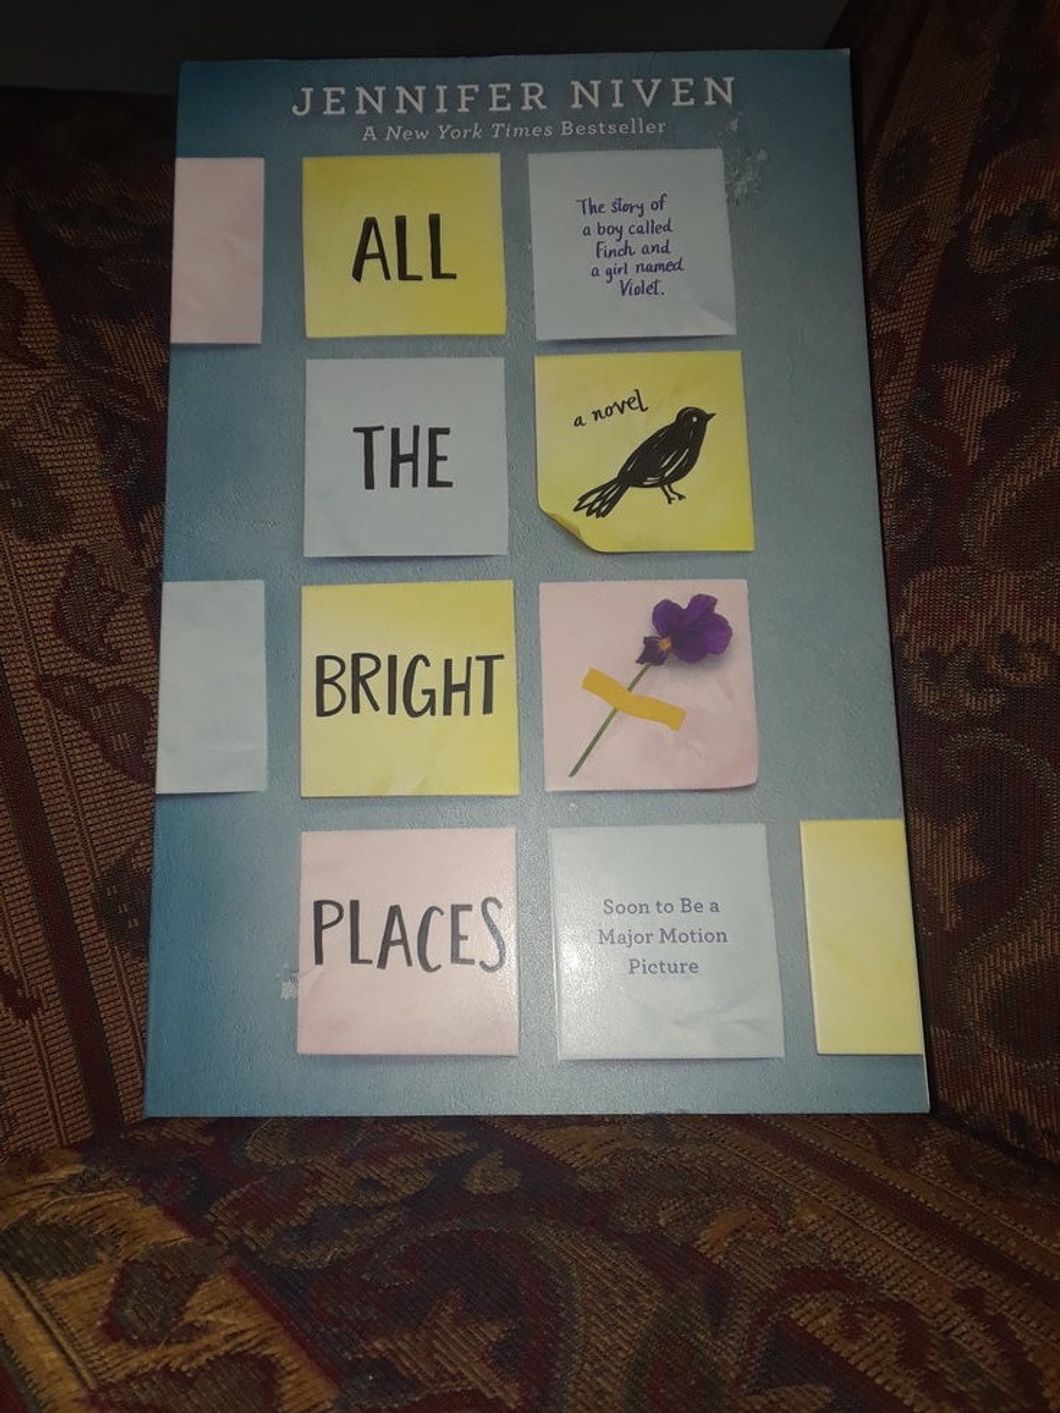 'All The Bright Places' Gets Their Finch